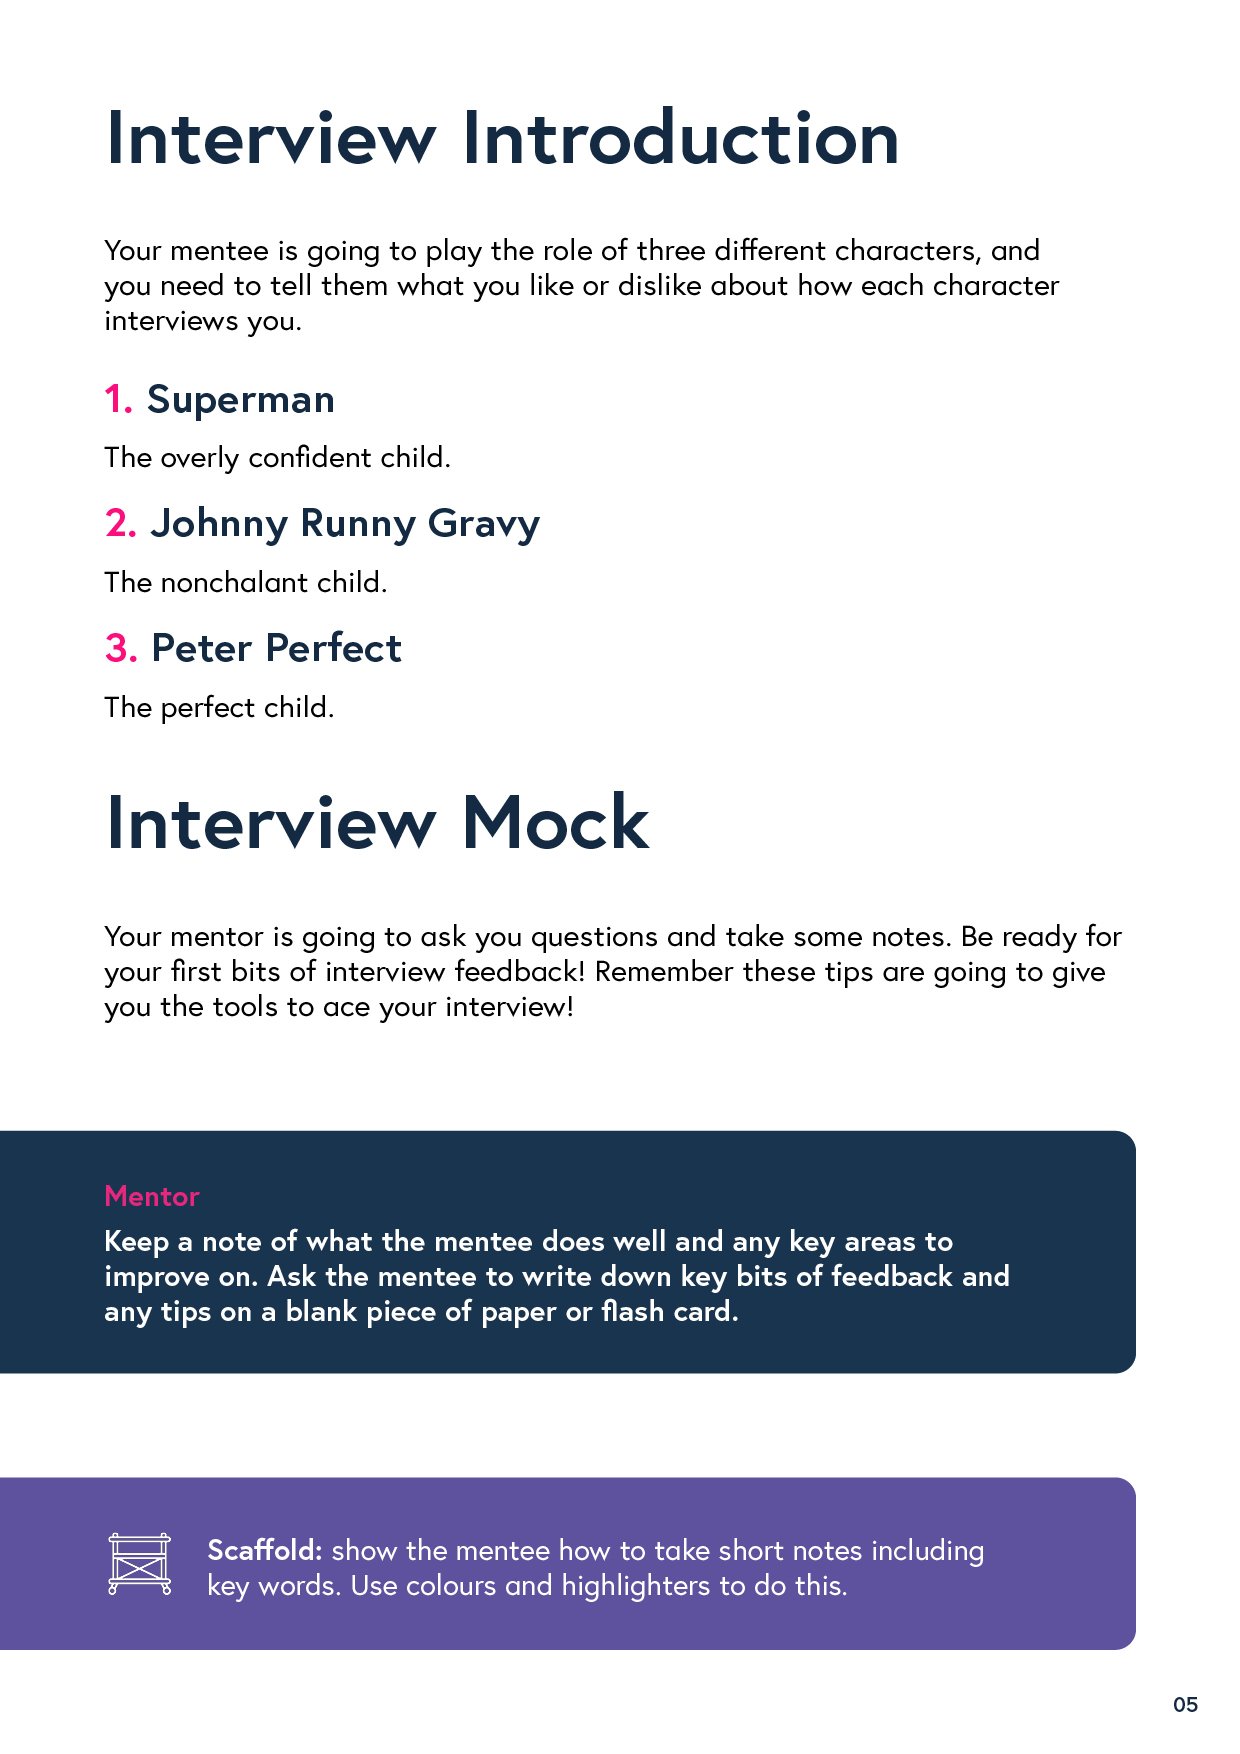 Interview Guide Previews6.jpg